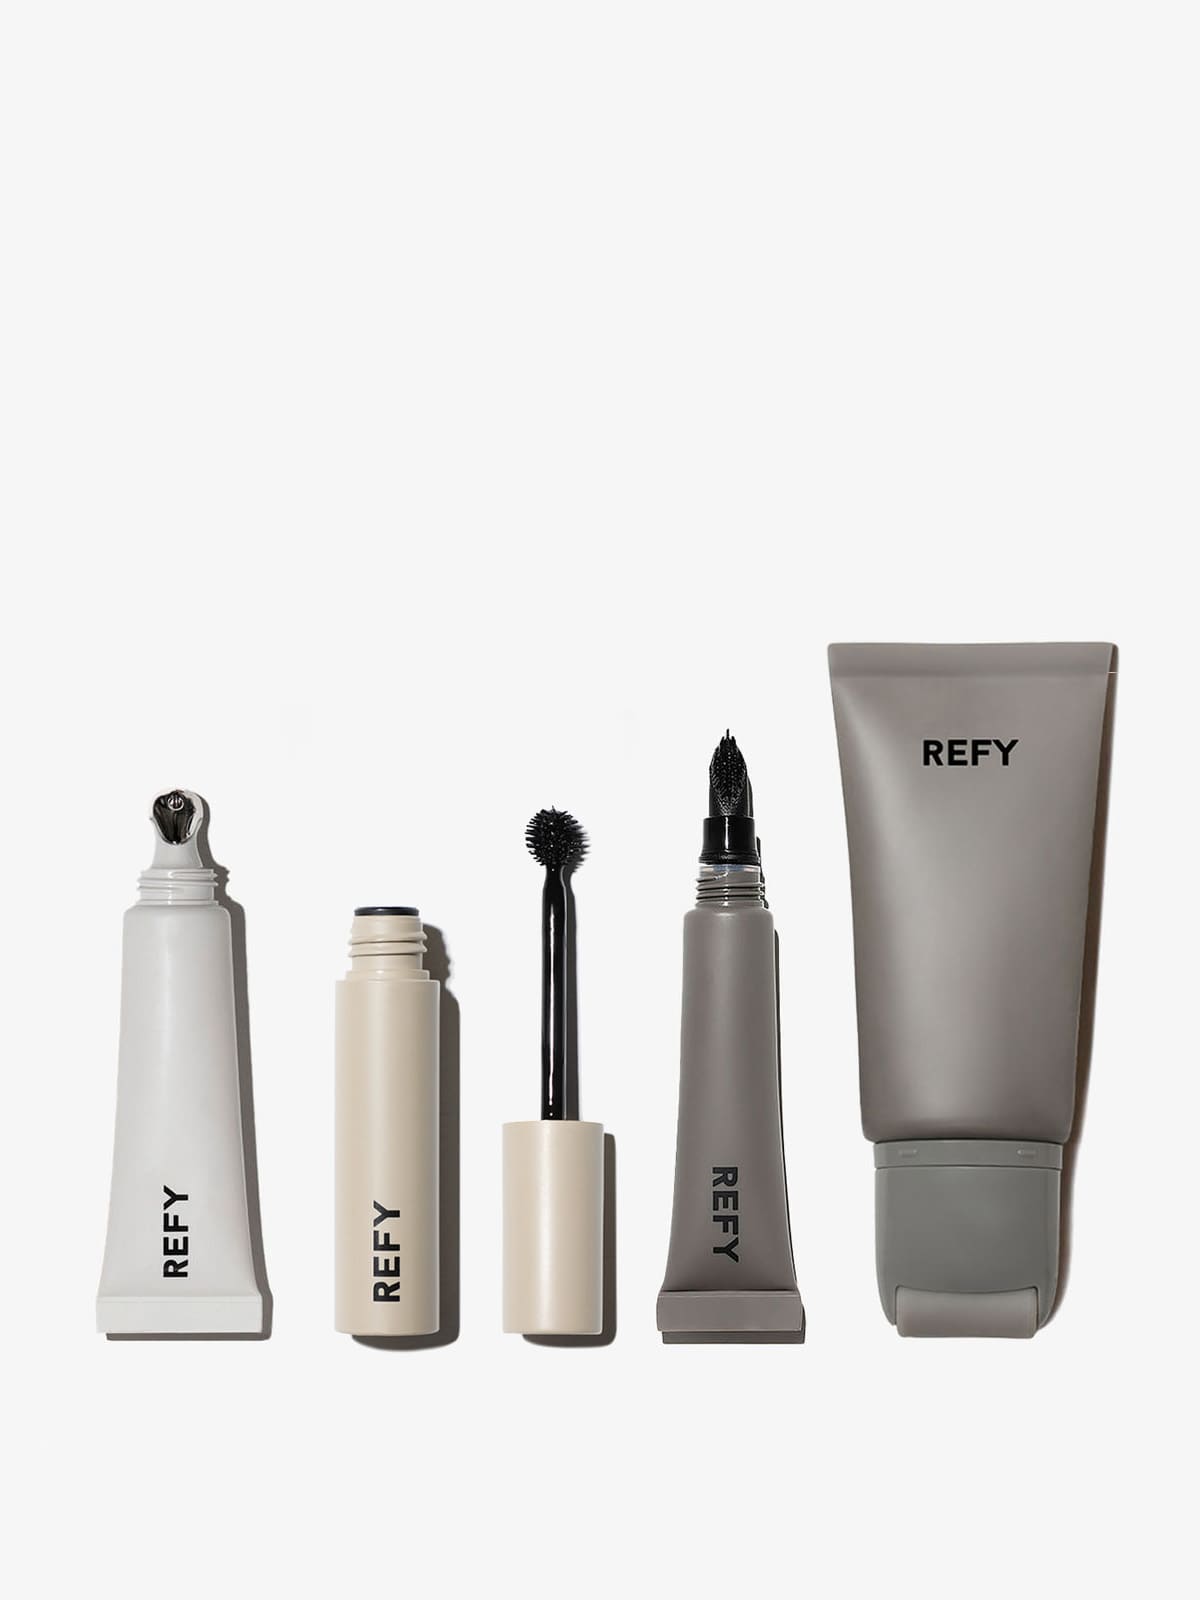 FRONT IMAGE OF REFY EVERYDAY ESSENTIALS. CONTAINS LIP GLOSS IN CLEAR, BROW TINT, LIP BUFF AND FACE PRIMER